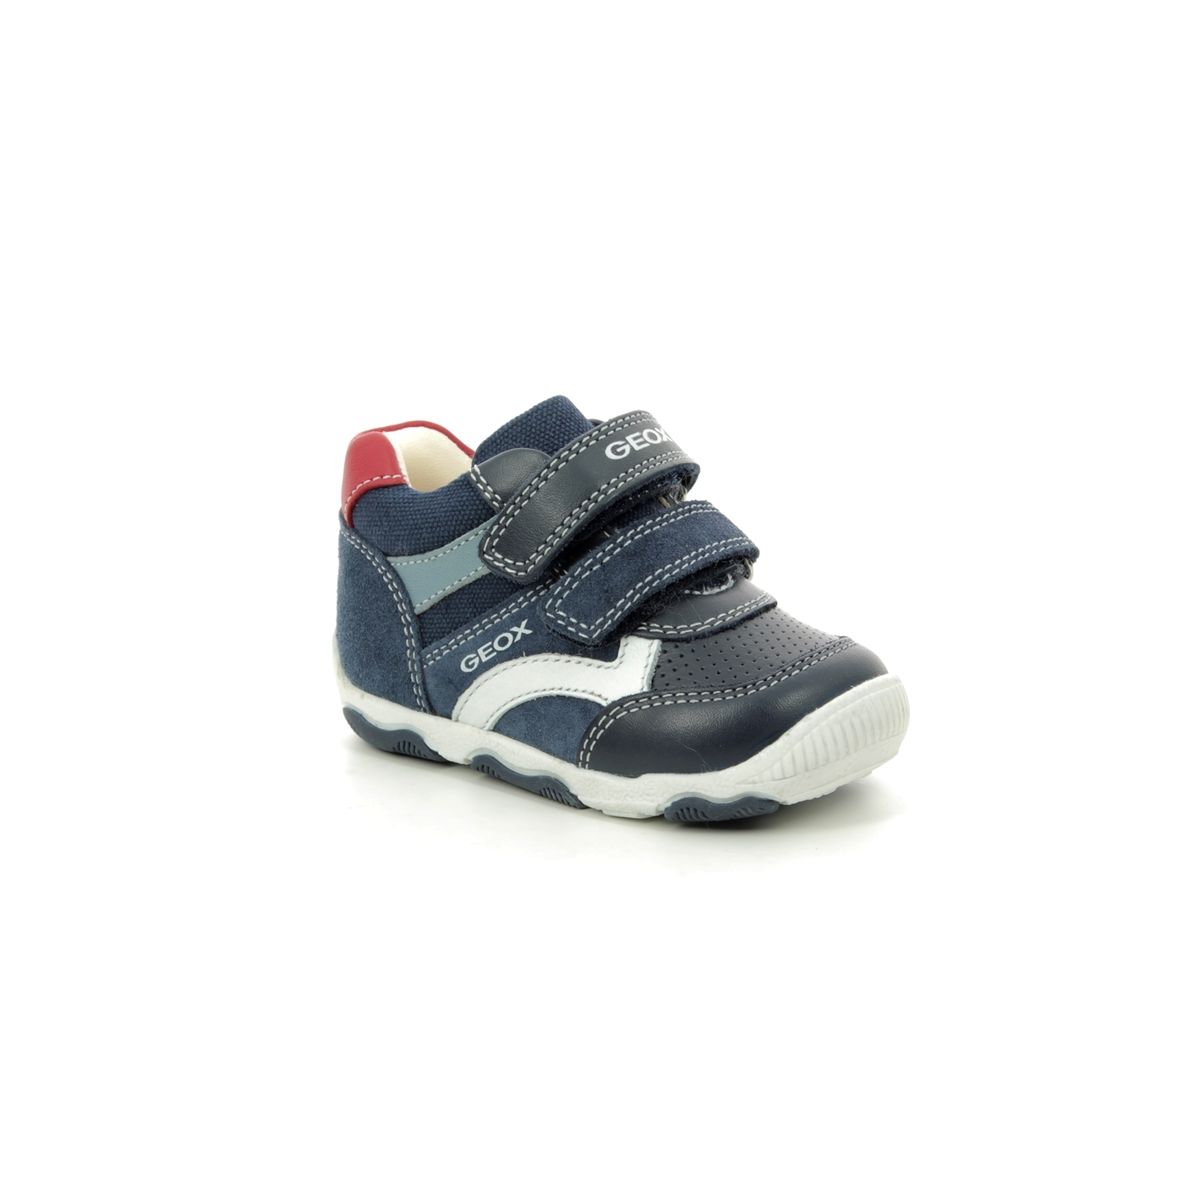 geox childrens shoes